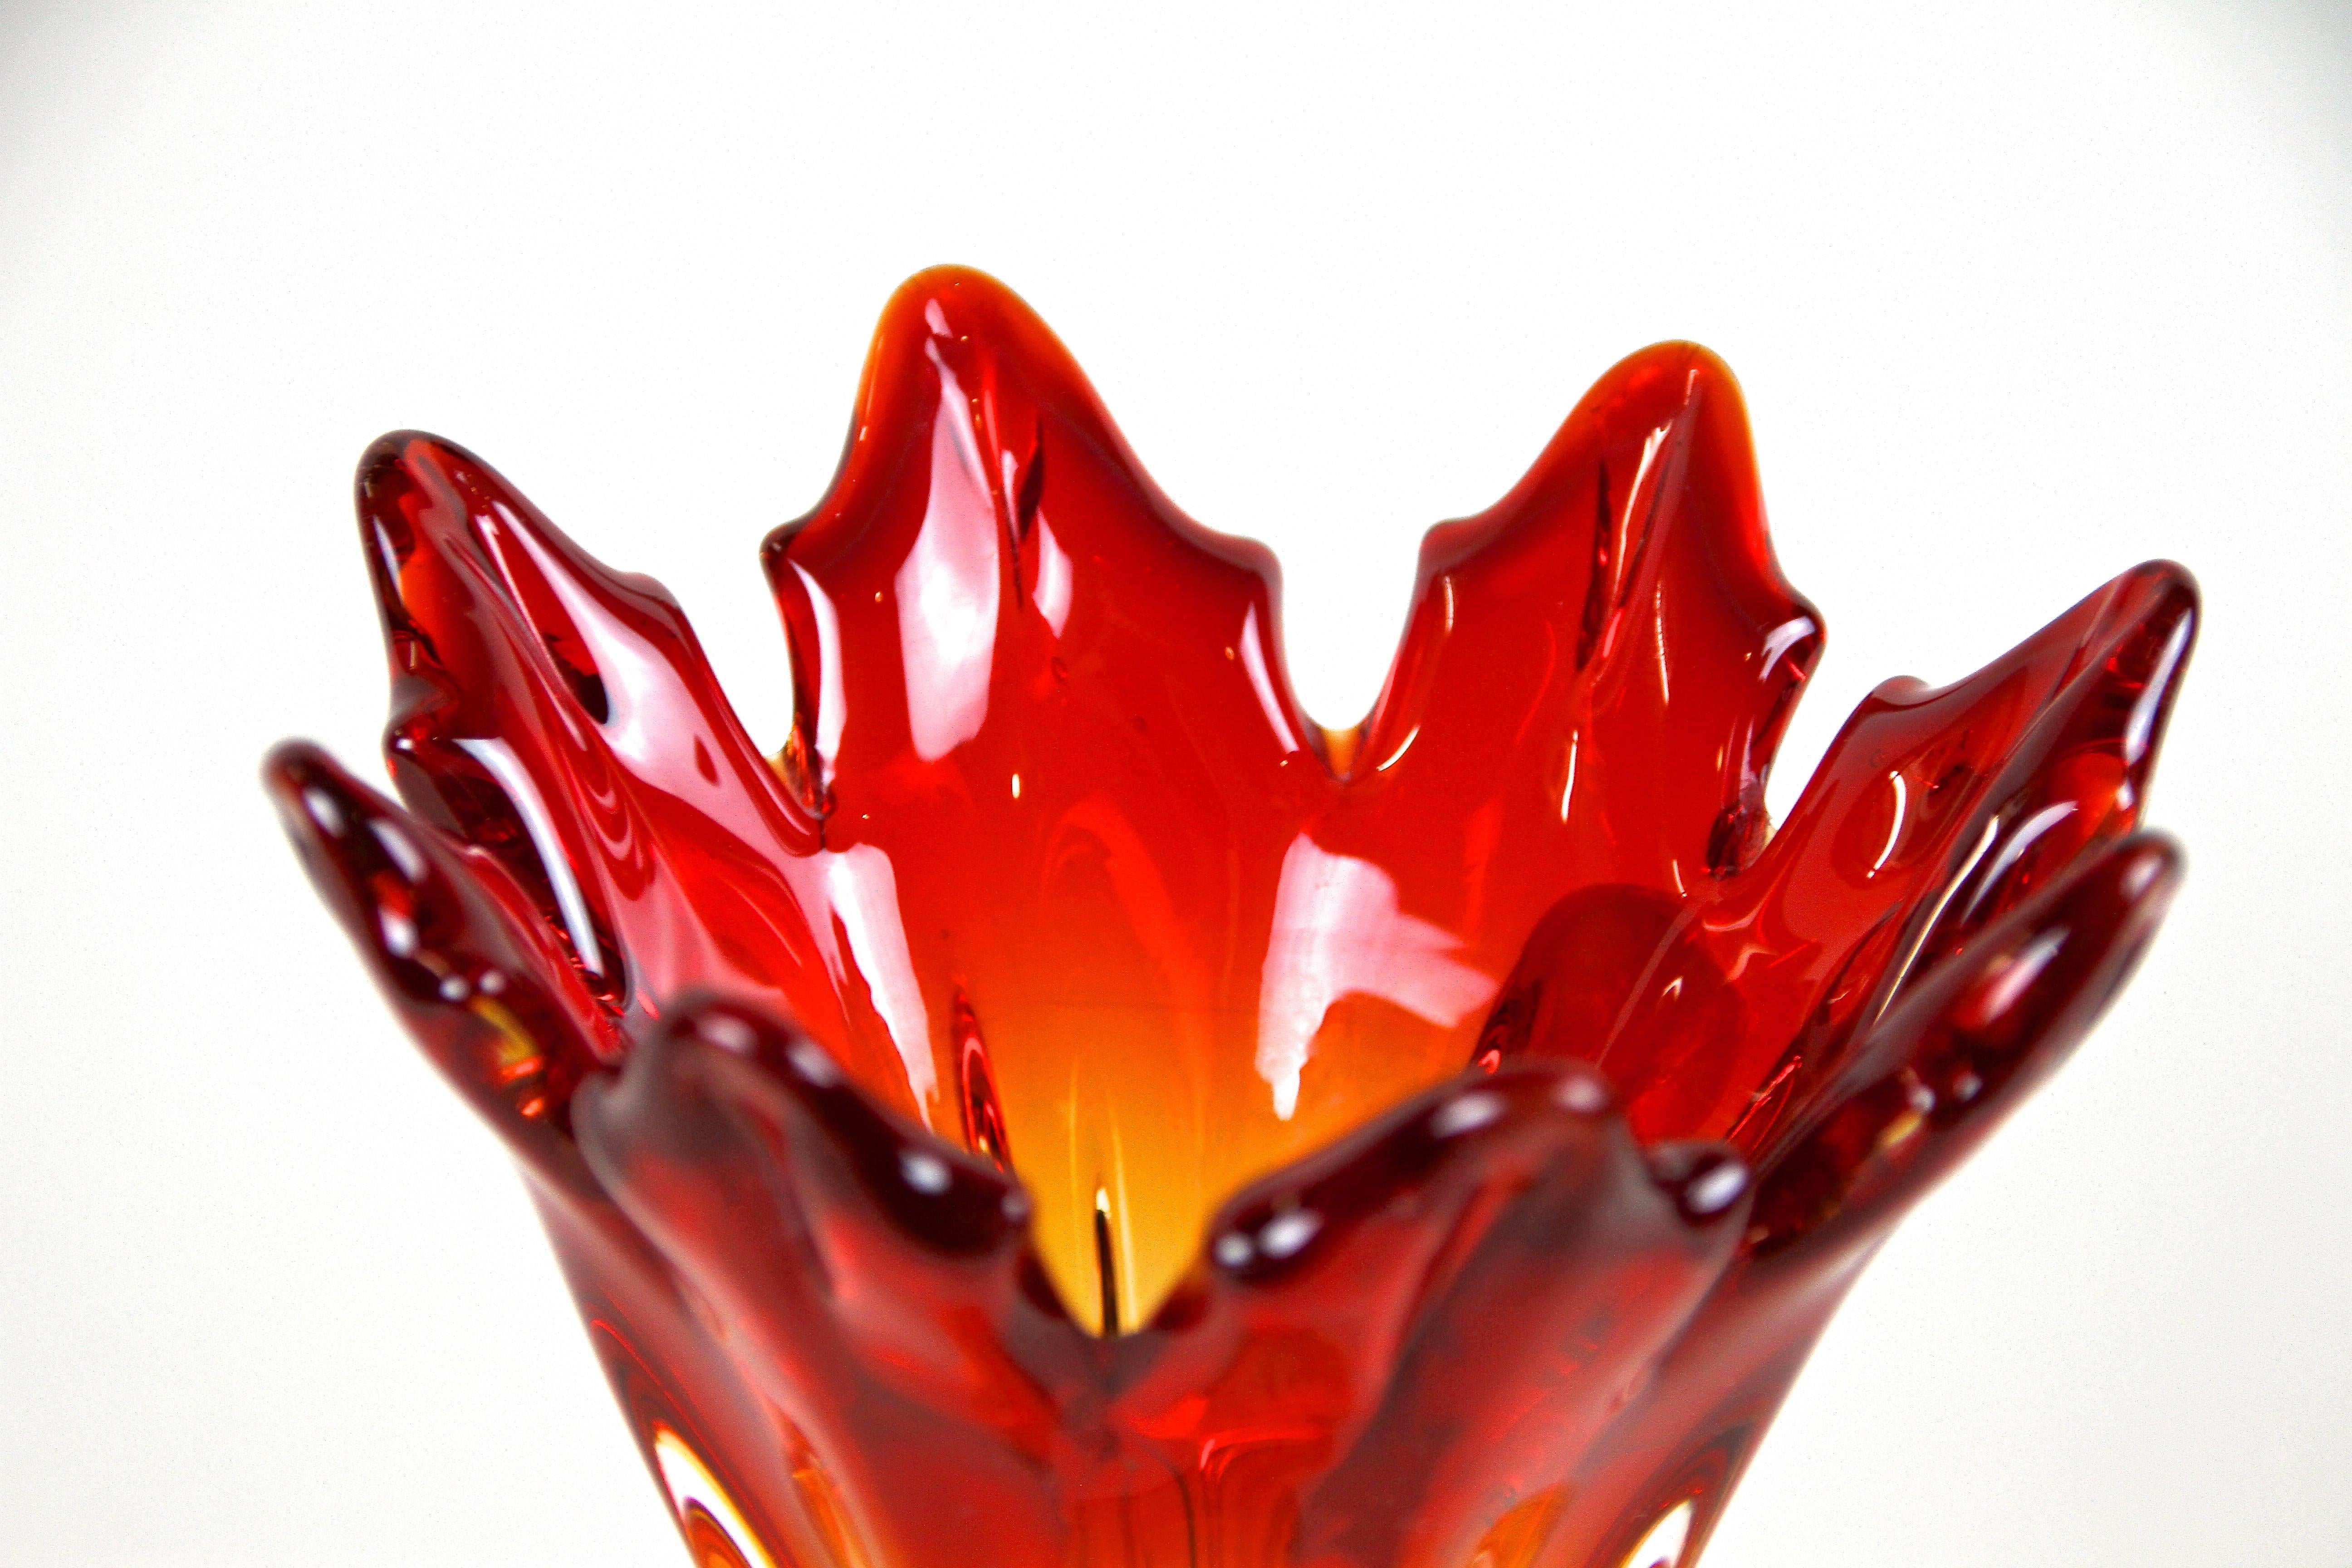 Colorful mid century red/ orange Murano glass vase out of the renown glass art workshops of Sommerso on the little island of Murano/ Italy. Artfully made around 1960/70 this fantastic shaped glass vase impresses with a very pleasing gradient going